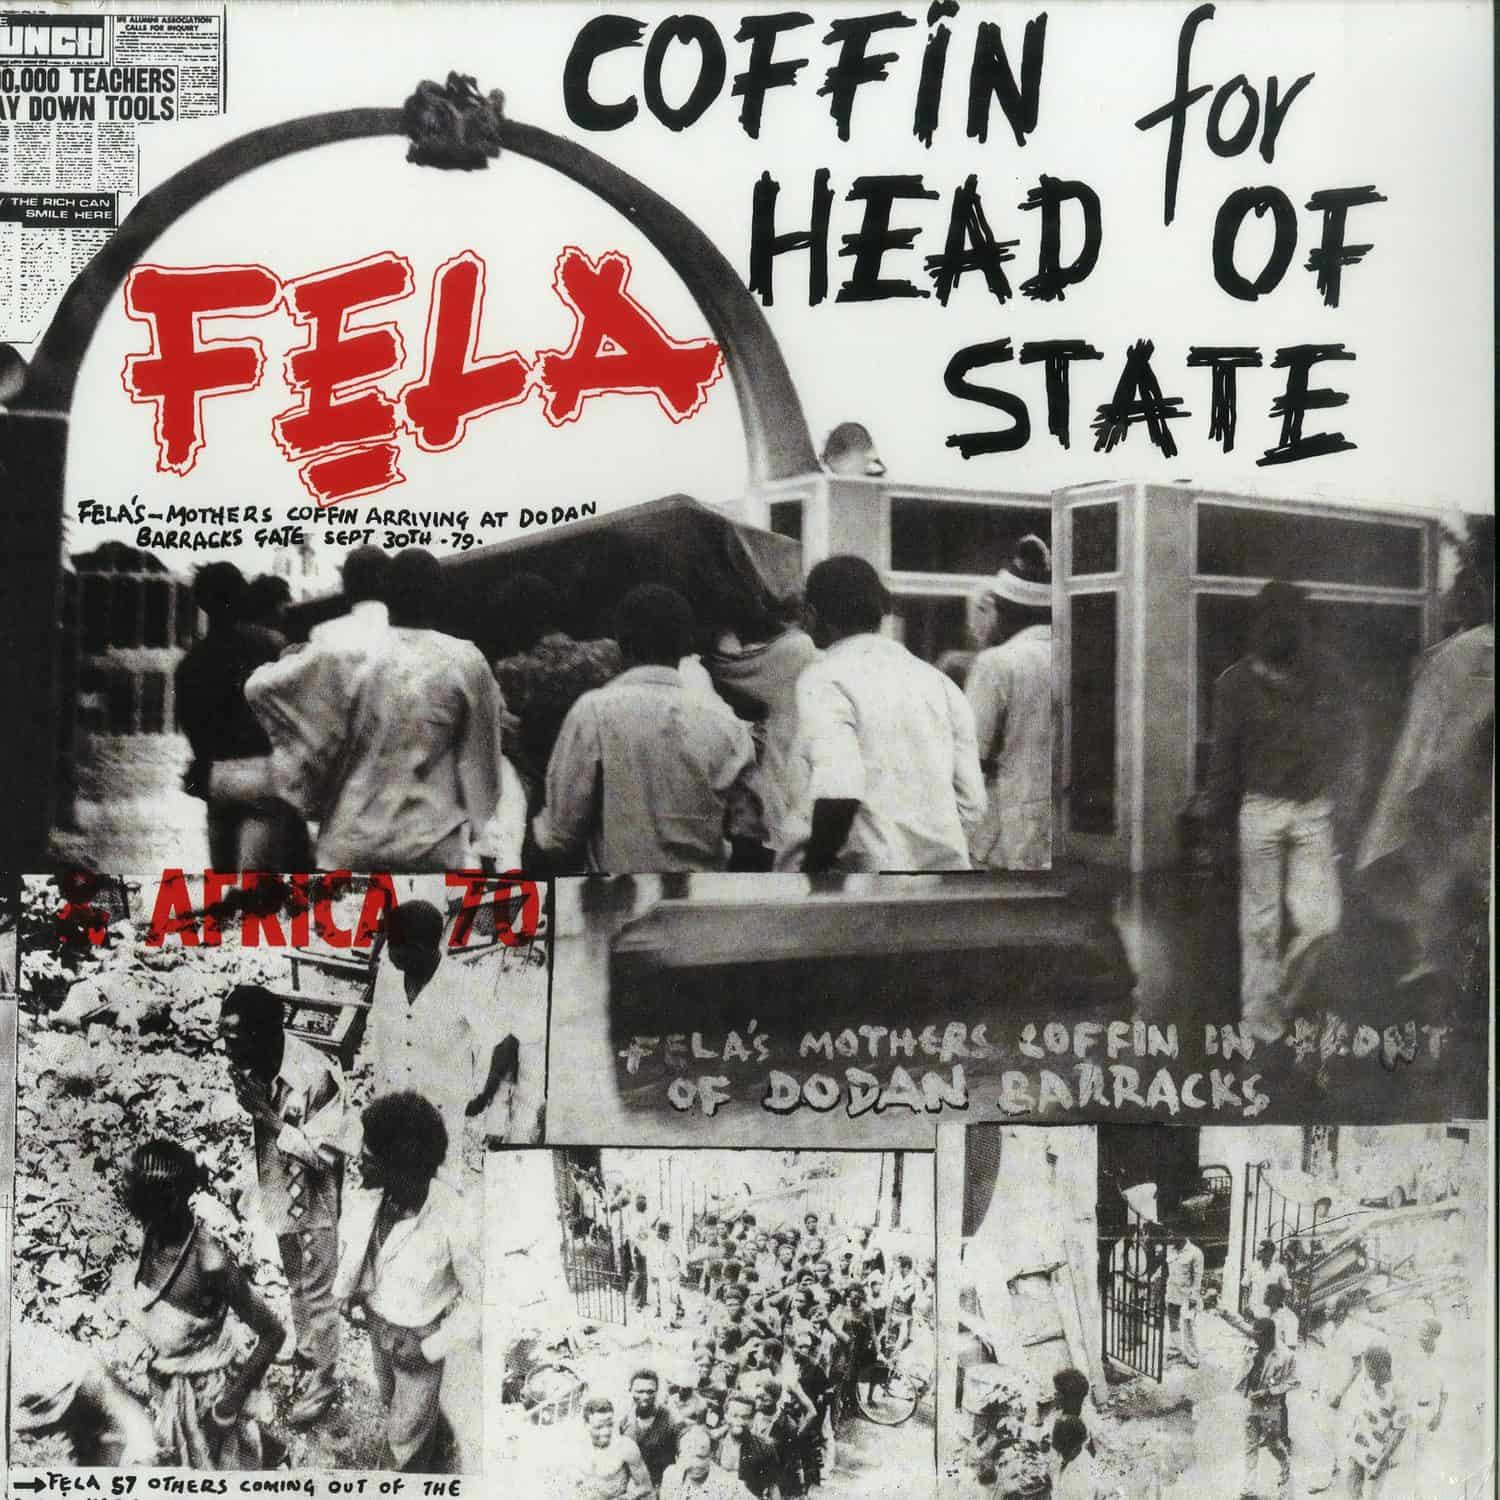 Fela Kuti - COFFIN FOR HEAD OF STATE 